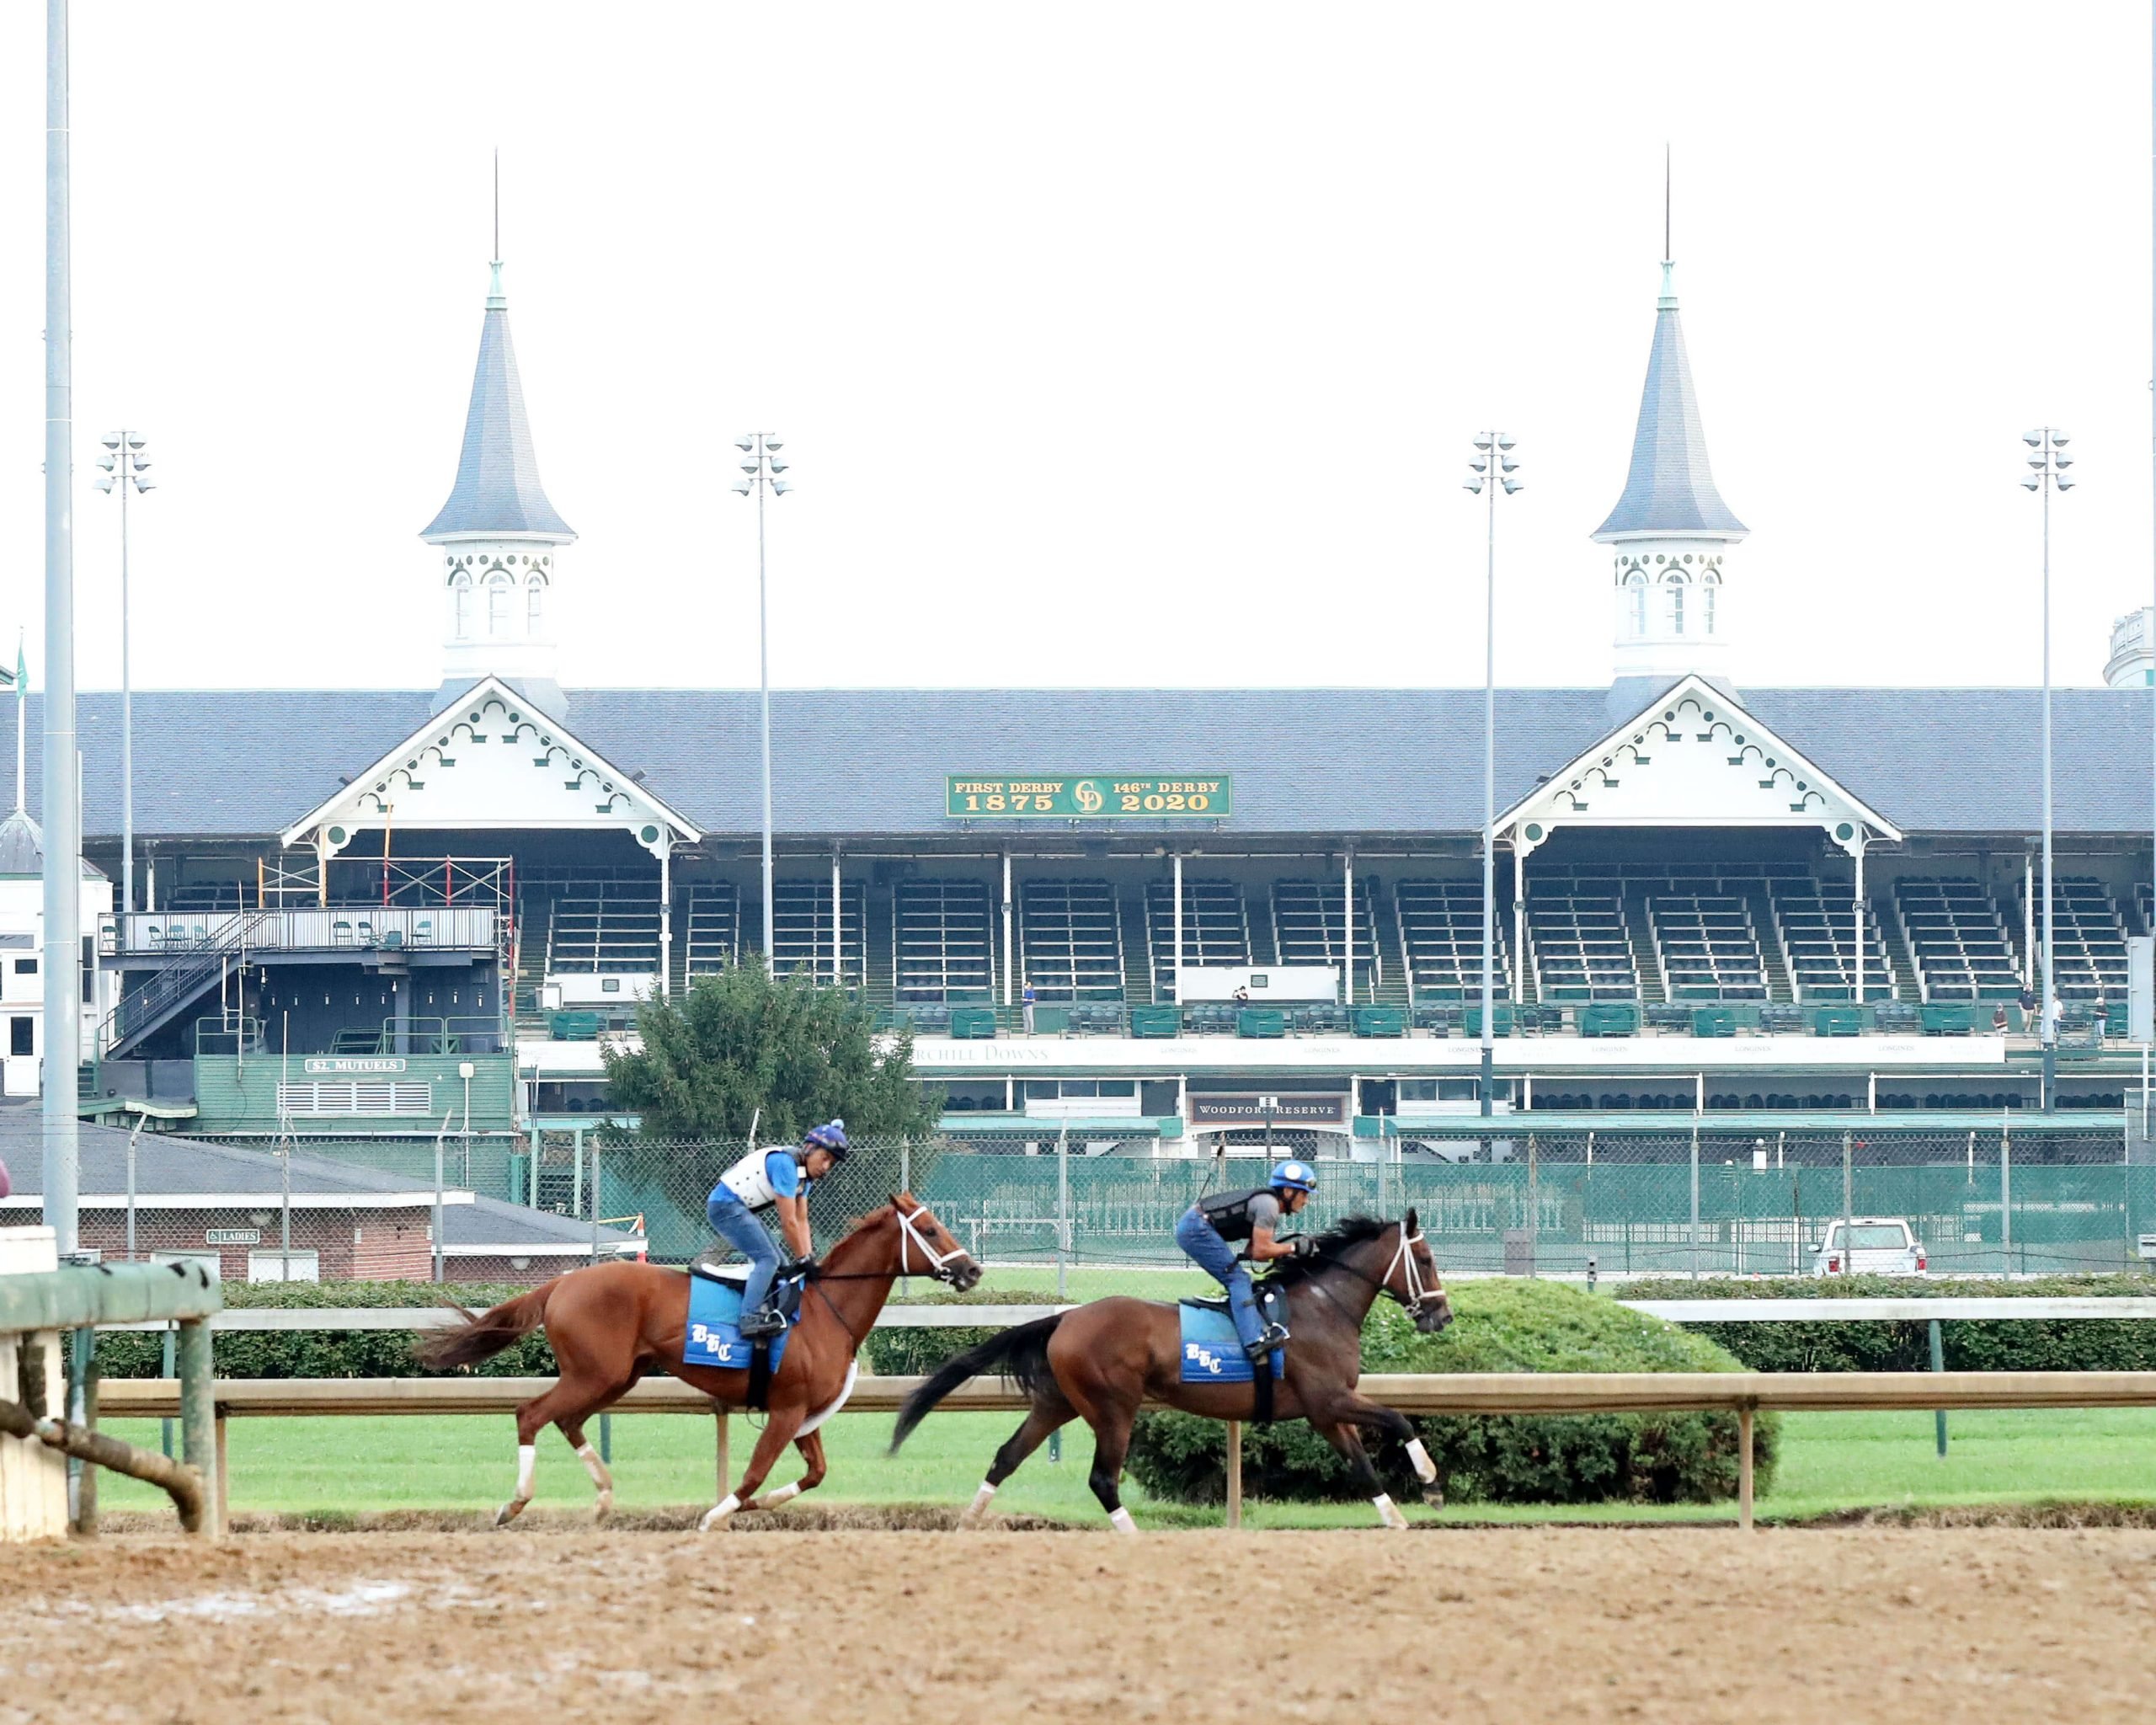 Kentucky Derby 2020 Facts, Spectators, Garland of Roses, Anthem